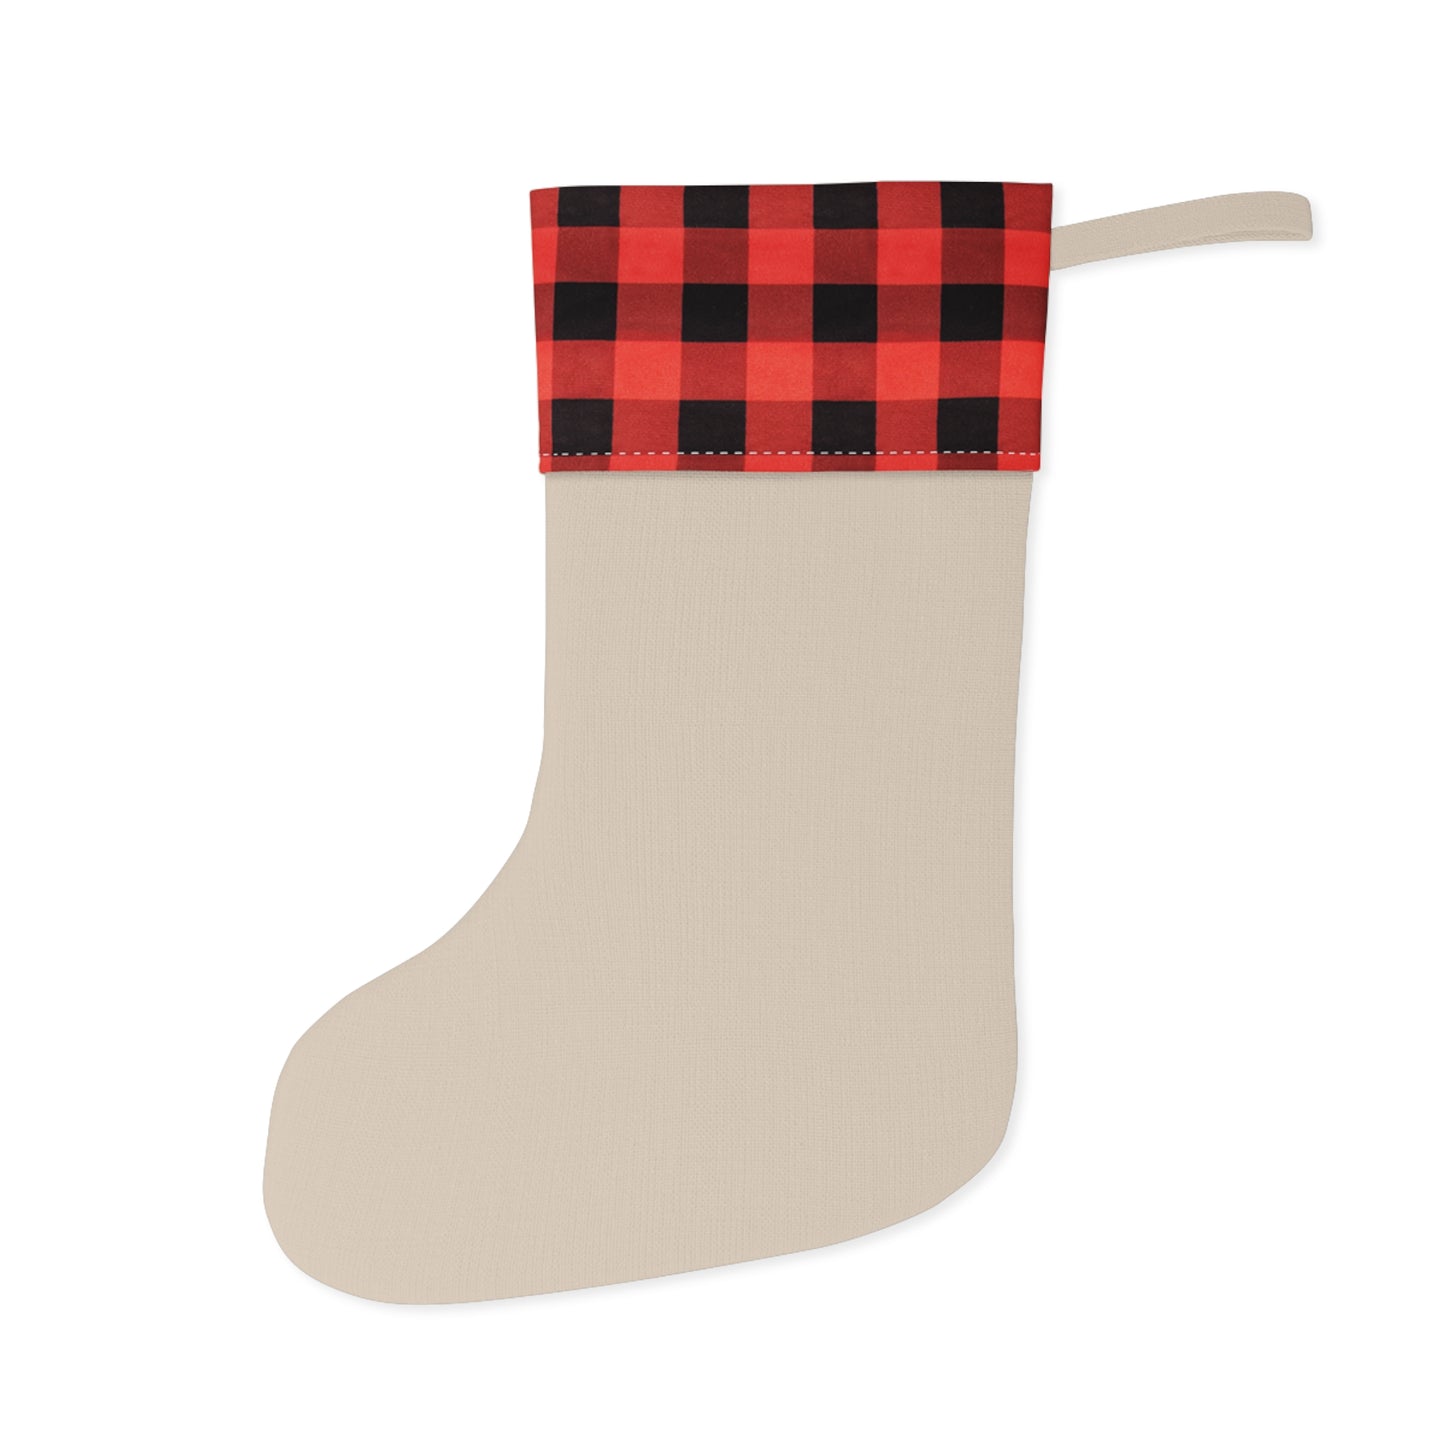 A personalized Holiday-Gnome Christmas Stocking on a white background.